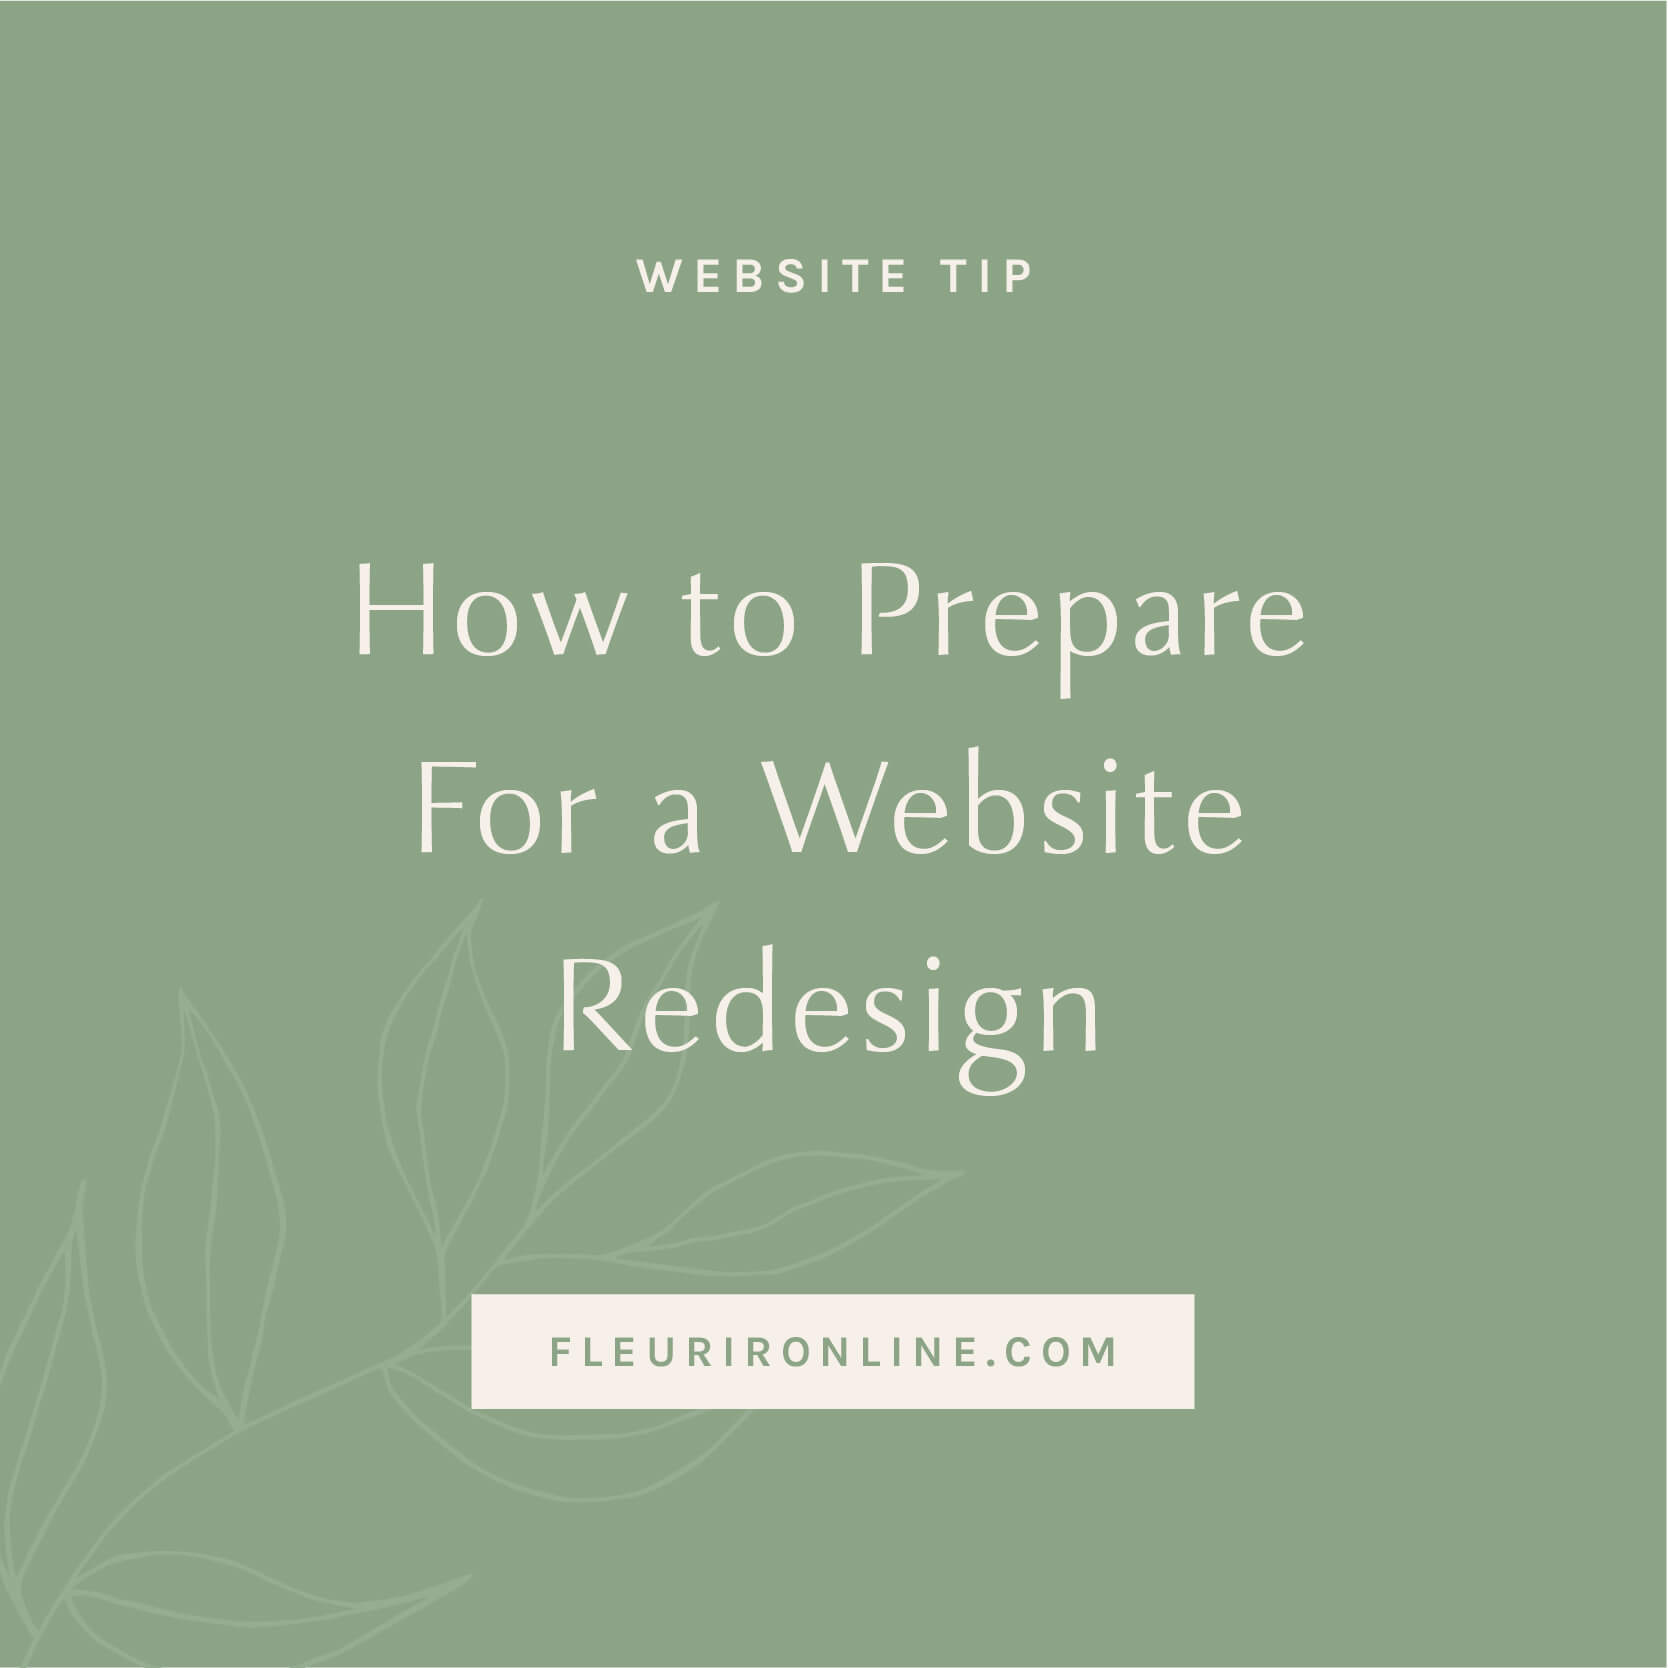 How to prepare for a website redesign